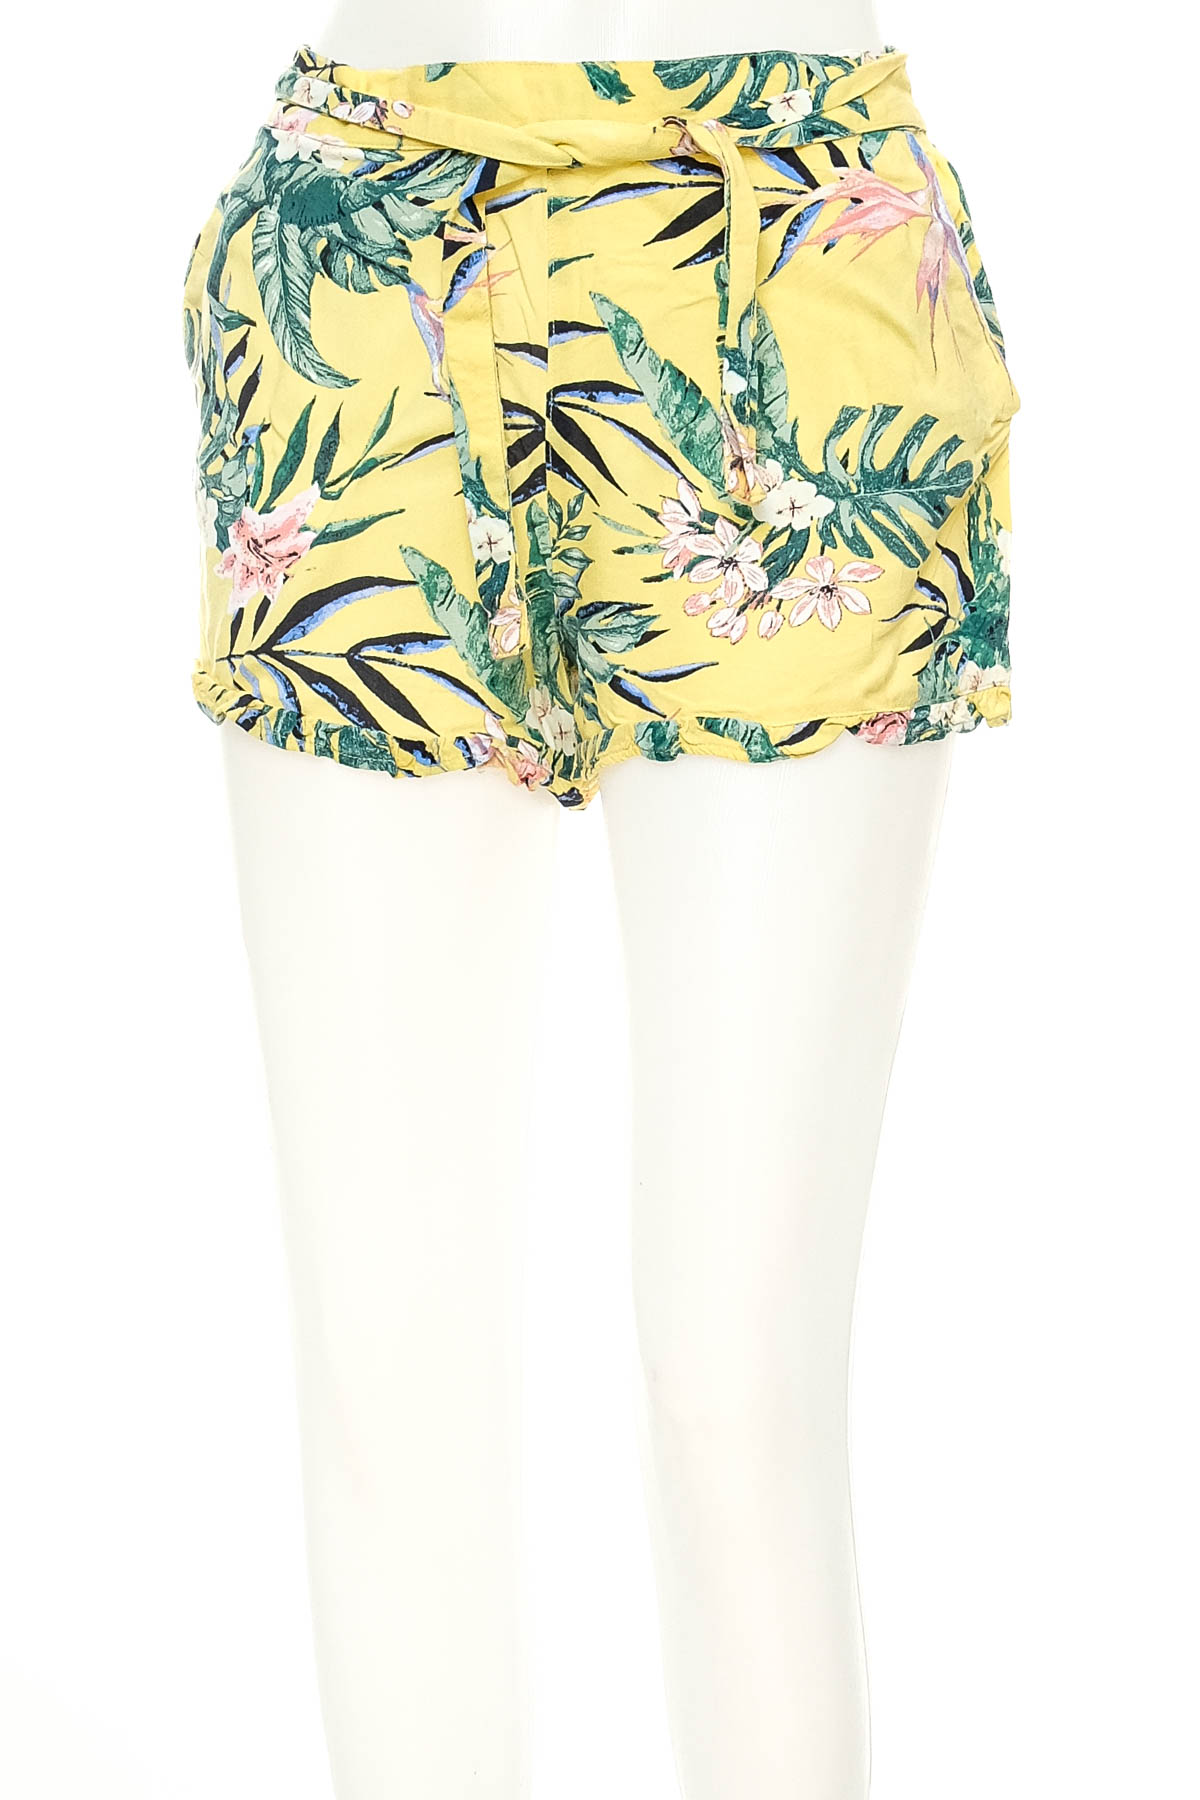 Shorts for girls - H&M - 0